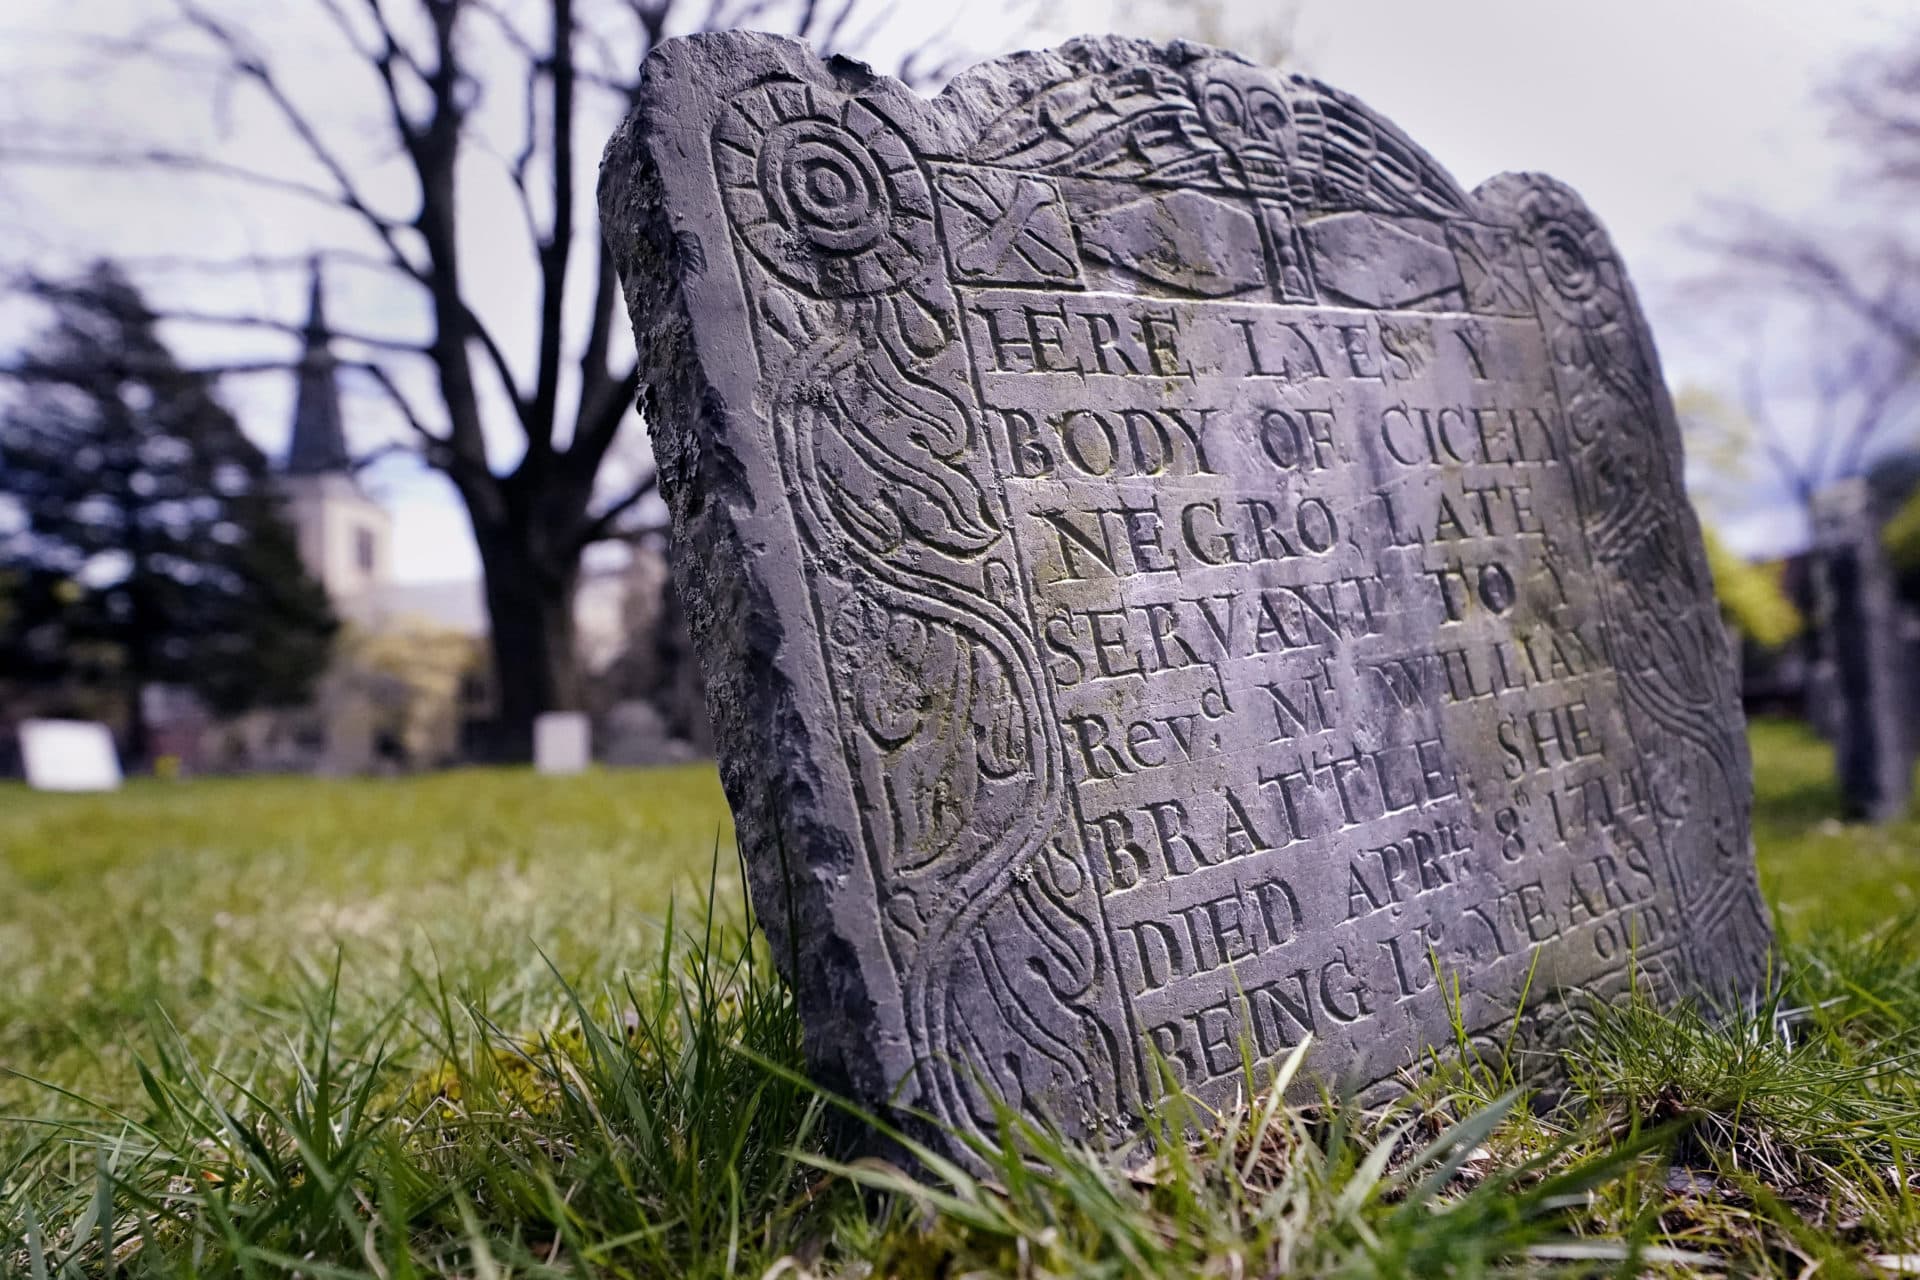 A headstone marks the grave of &quot;Cicely&quot;, a 15-year-old &quot;Negro Servant&quot; of Rev. William Brattle, a treasurer at Harvard College, at the Old Burying Ground just outside Harvard Yard, April 27, 2022, in Cambridge, Mass. (Charles Krupa/AP)